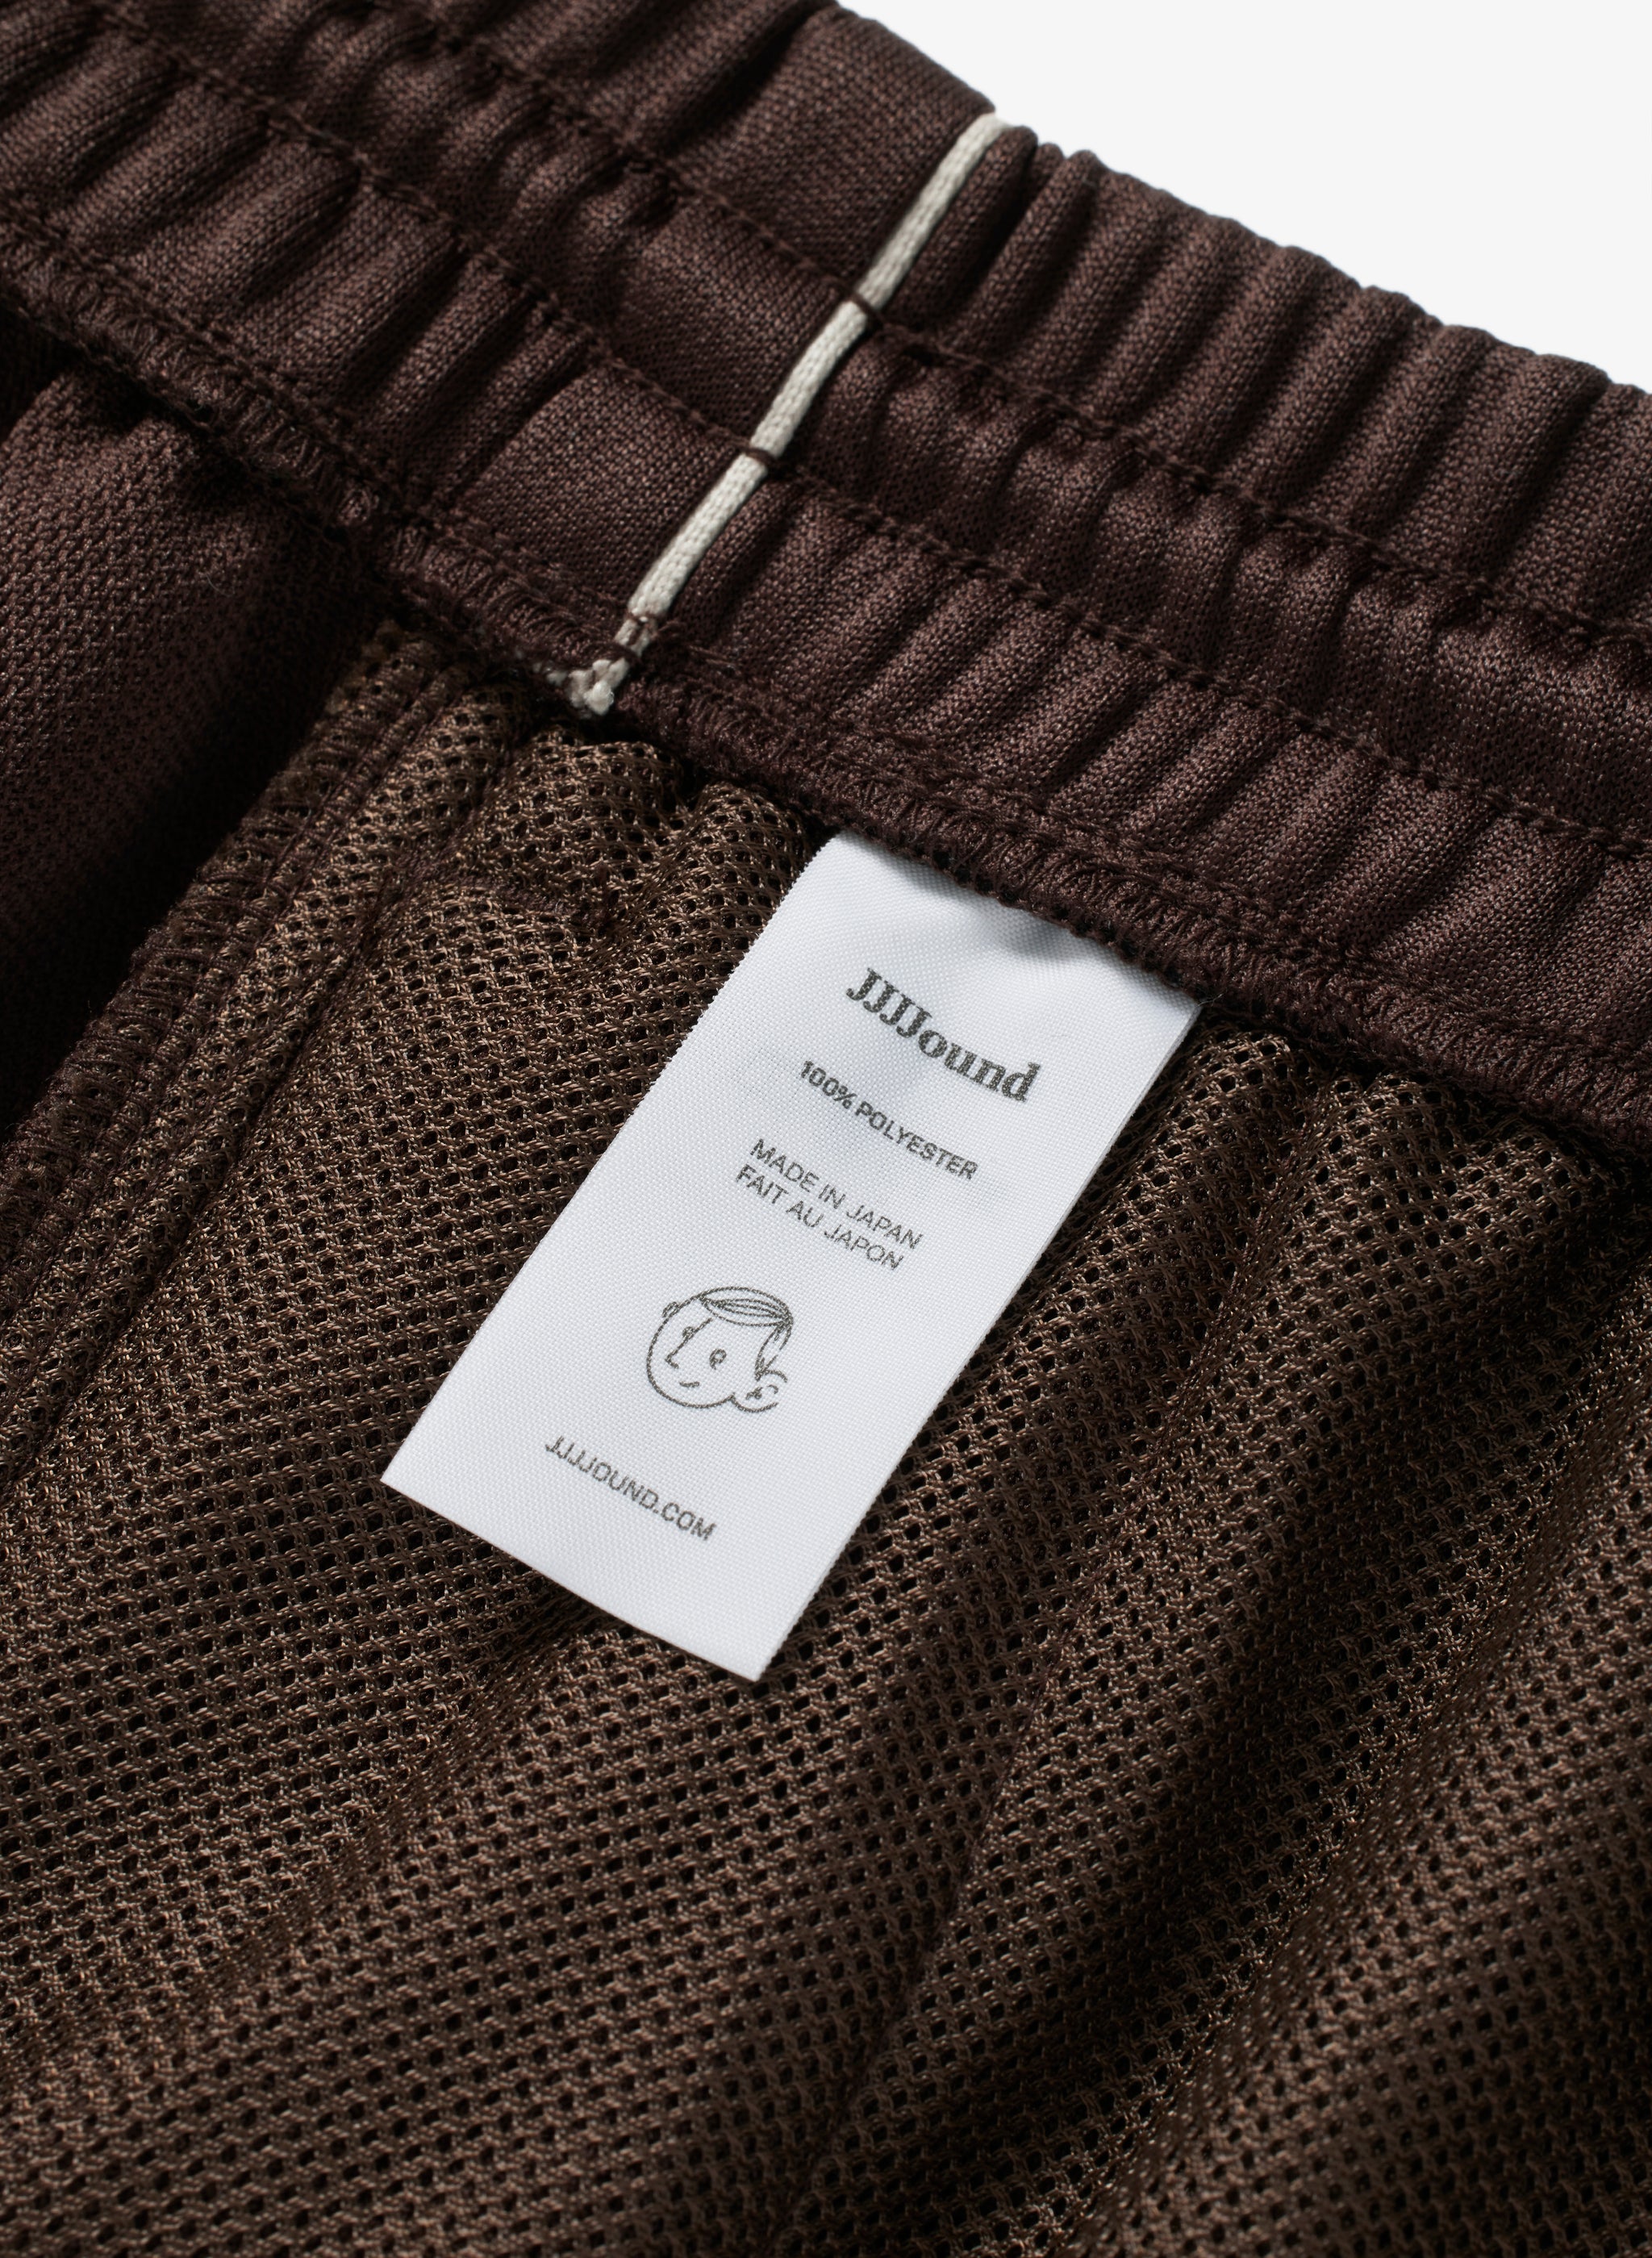 Fan Tracksuit Bottom - Brown Tricot